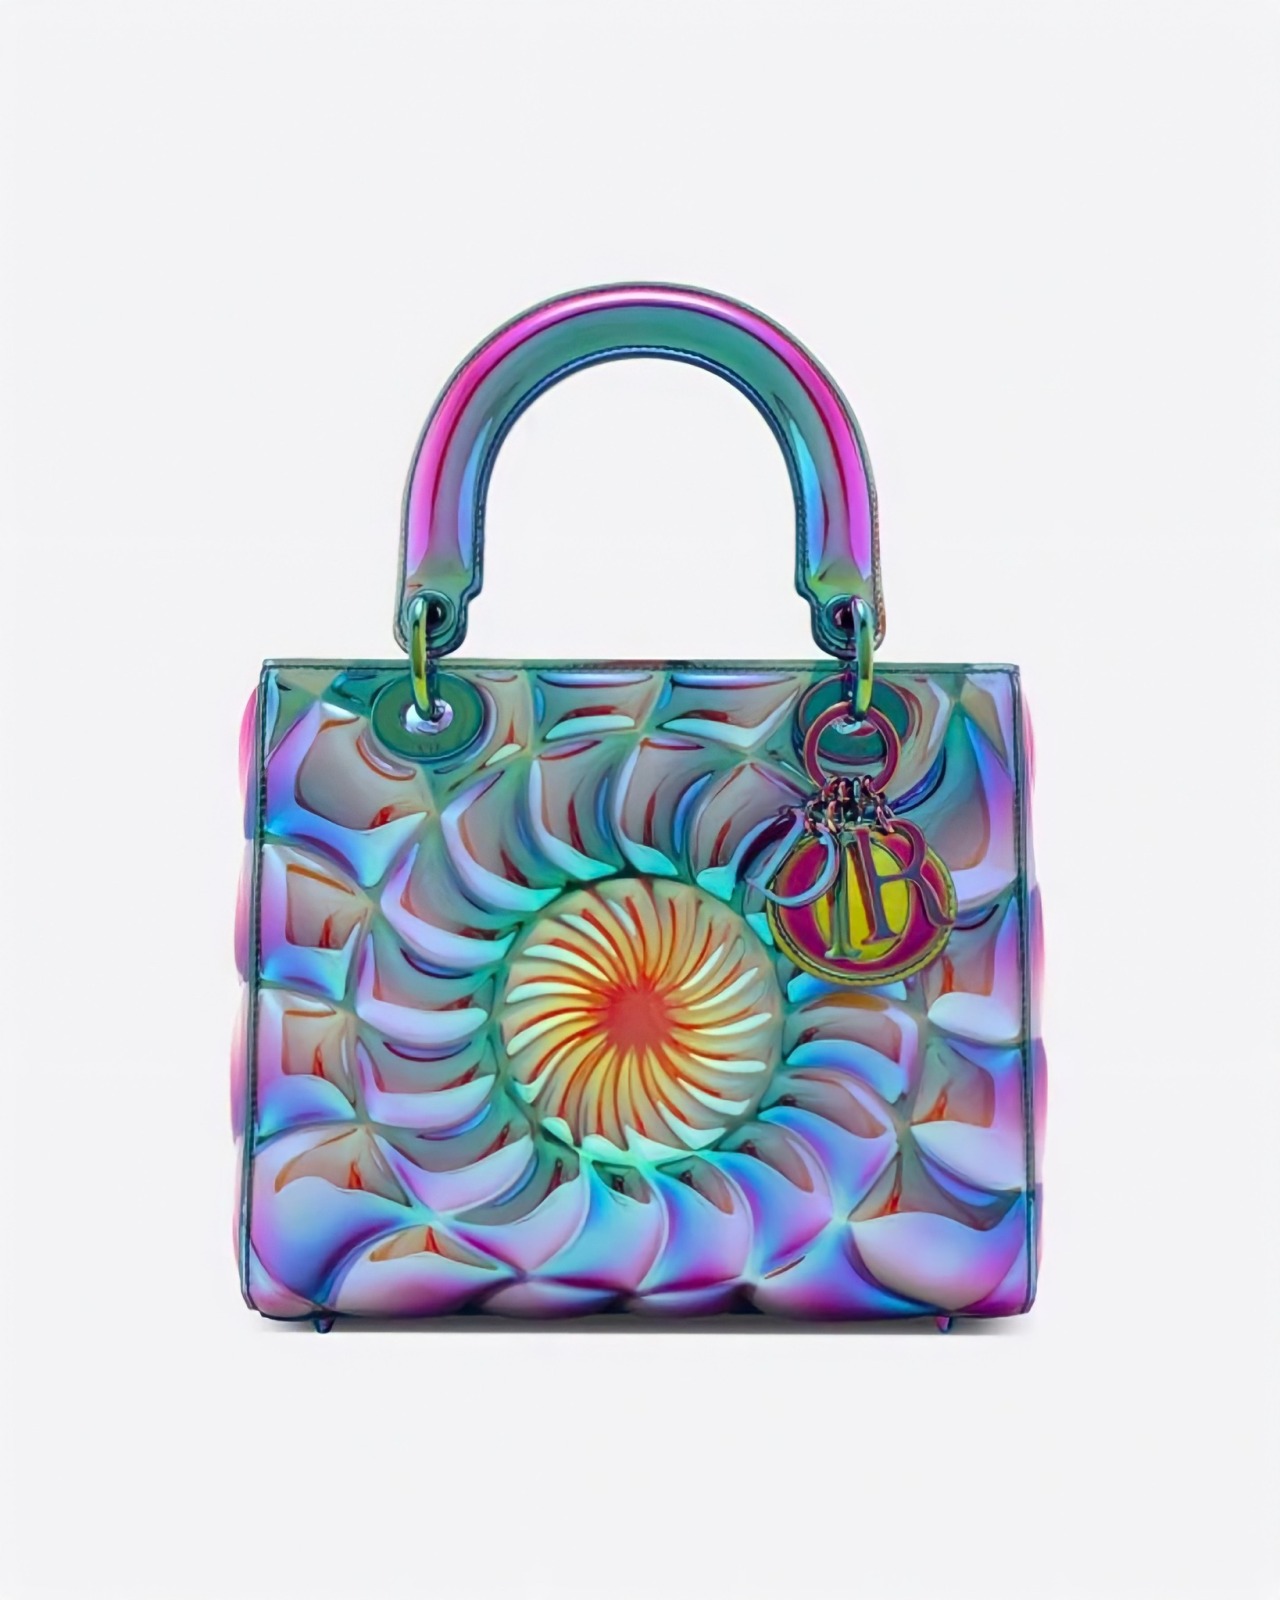 R Lady Dior Art Bag in collaboration with Judy...